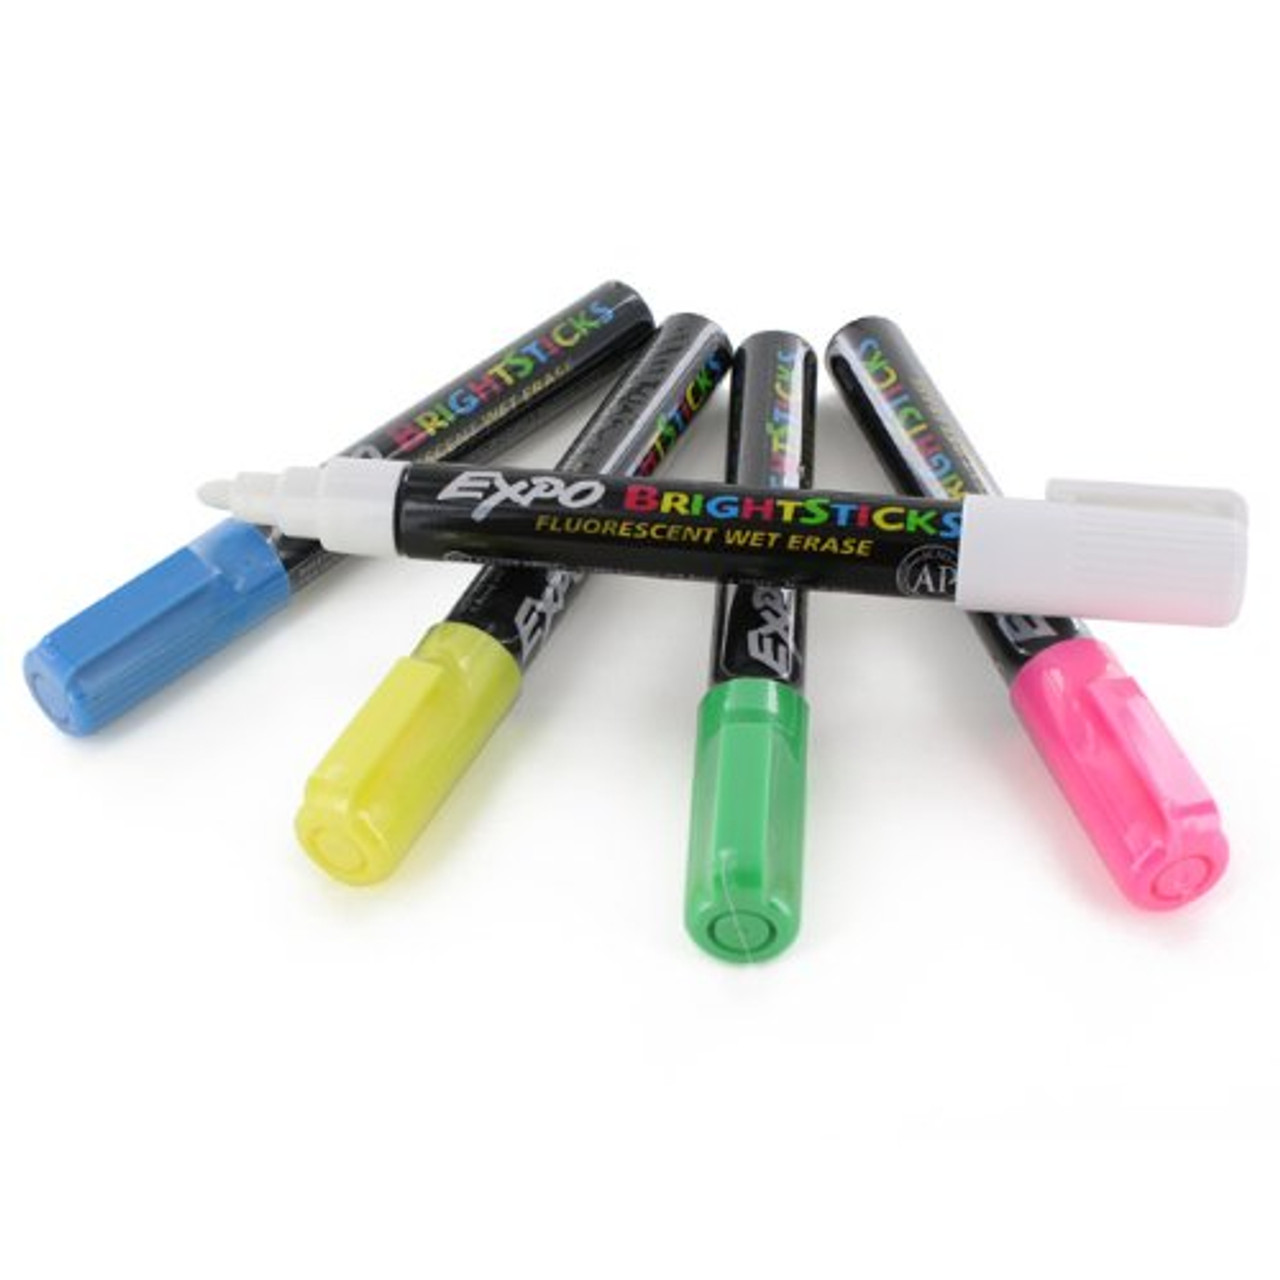 Black Dry Erase Board Markers, Set of 5, Includes 1 Pink, 1 White, 1  Yellow, 1 Green, and 1 Blue Marker